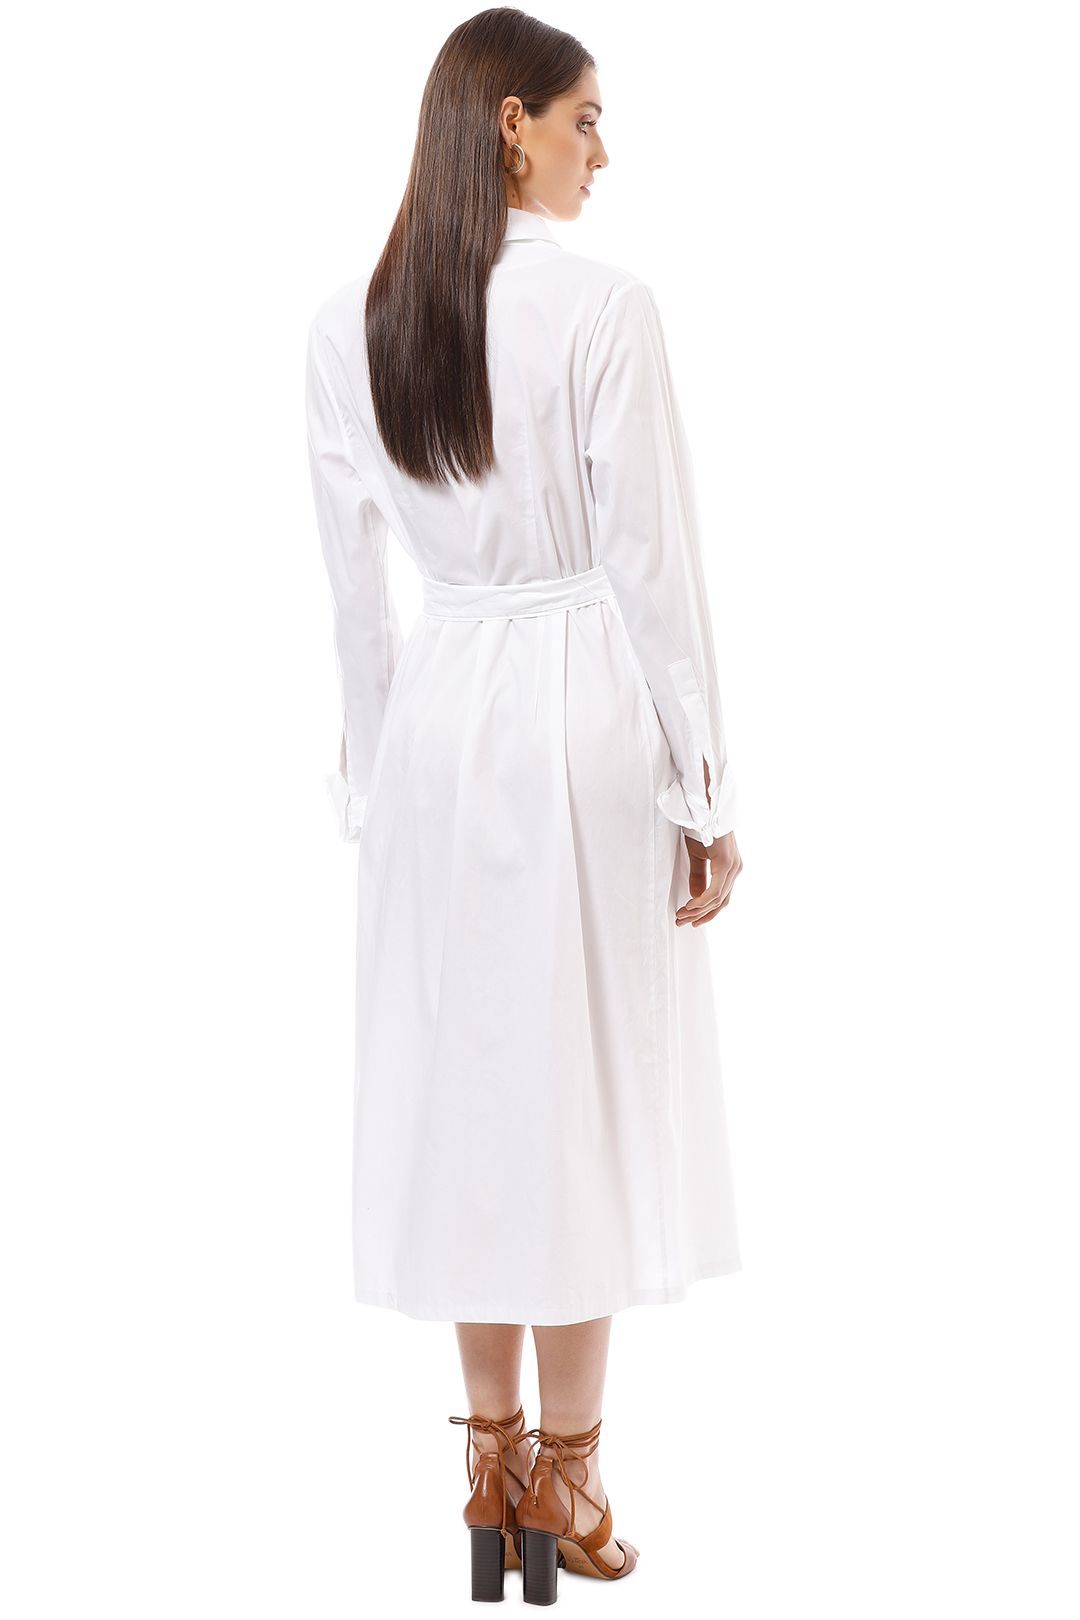 CMEO Collective - Your Type Shirt Dress - White - Back